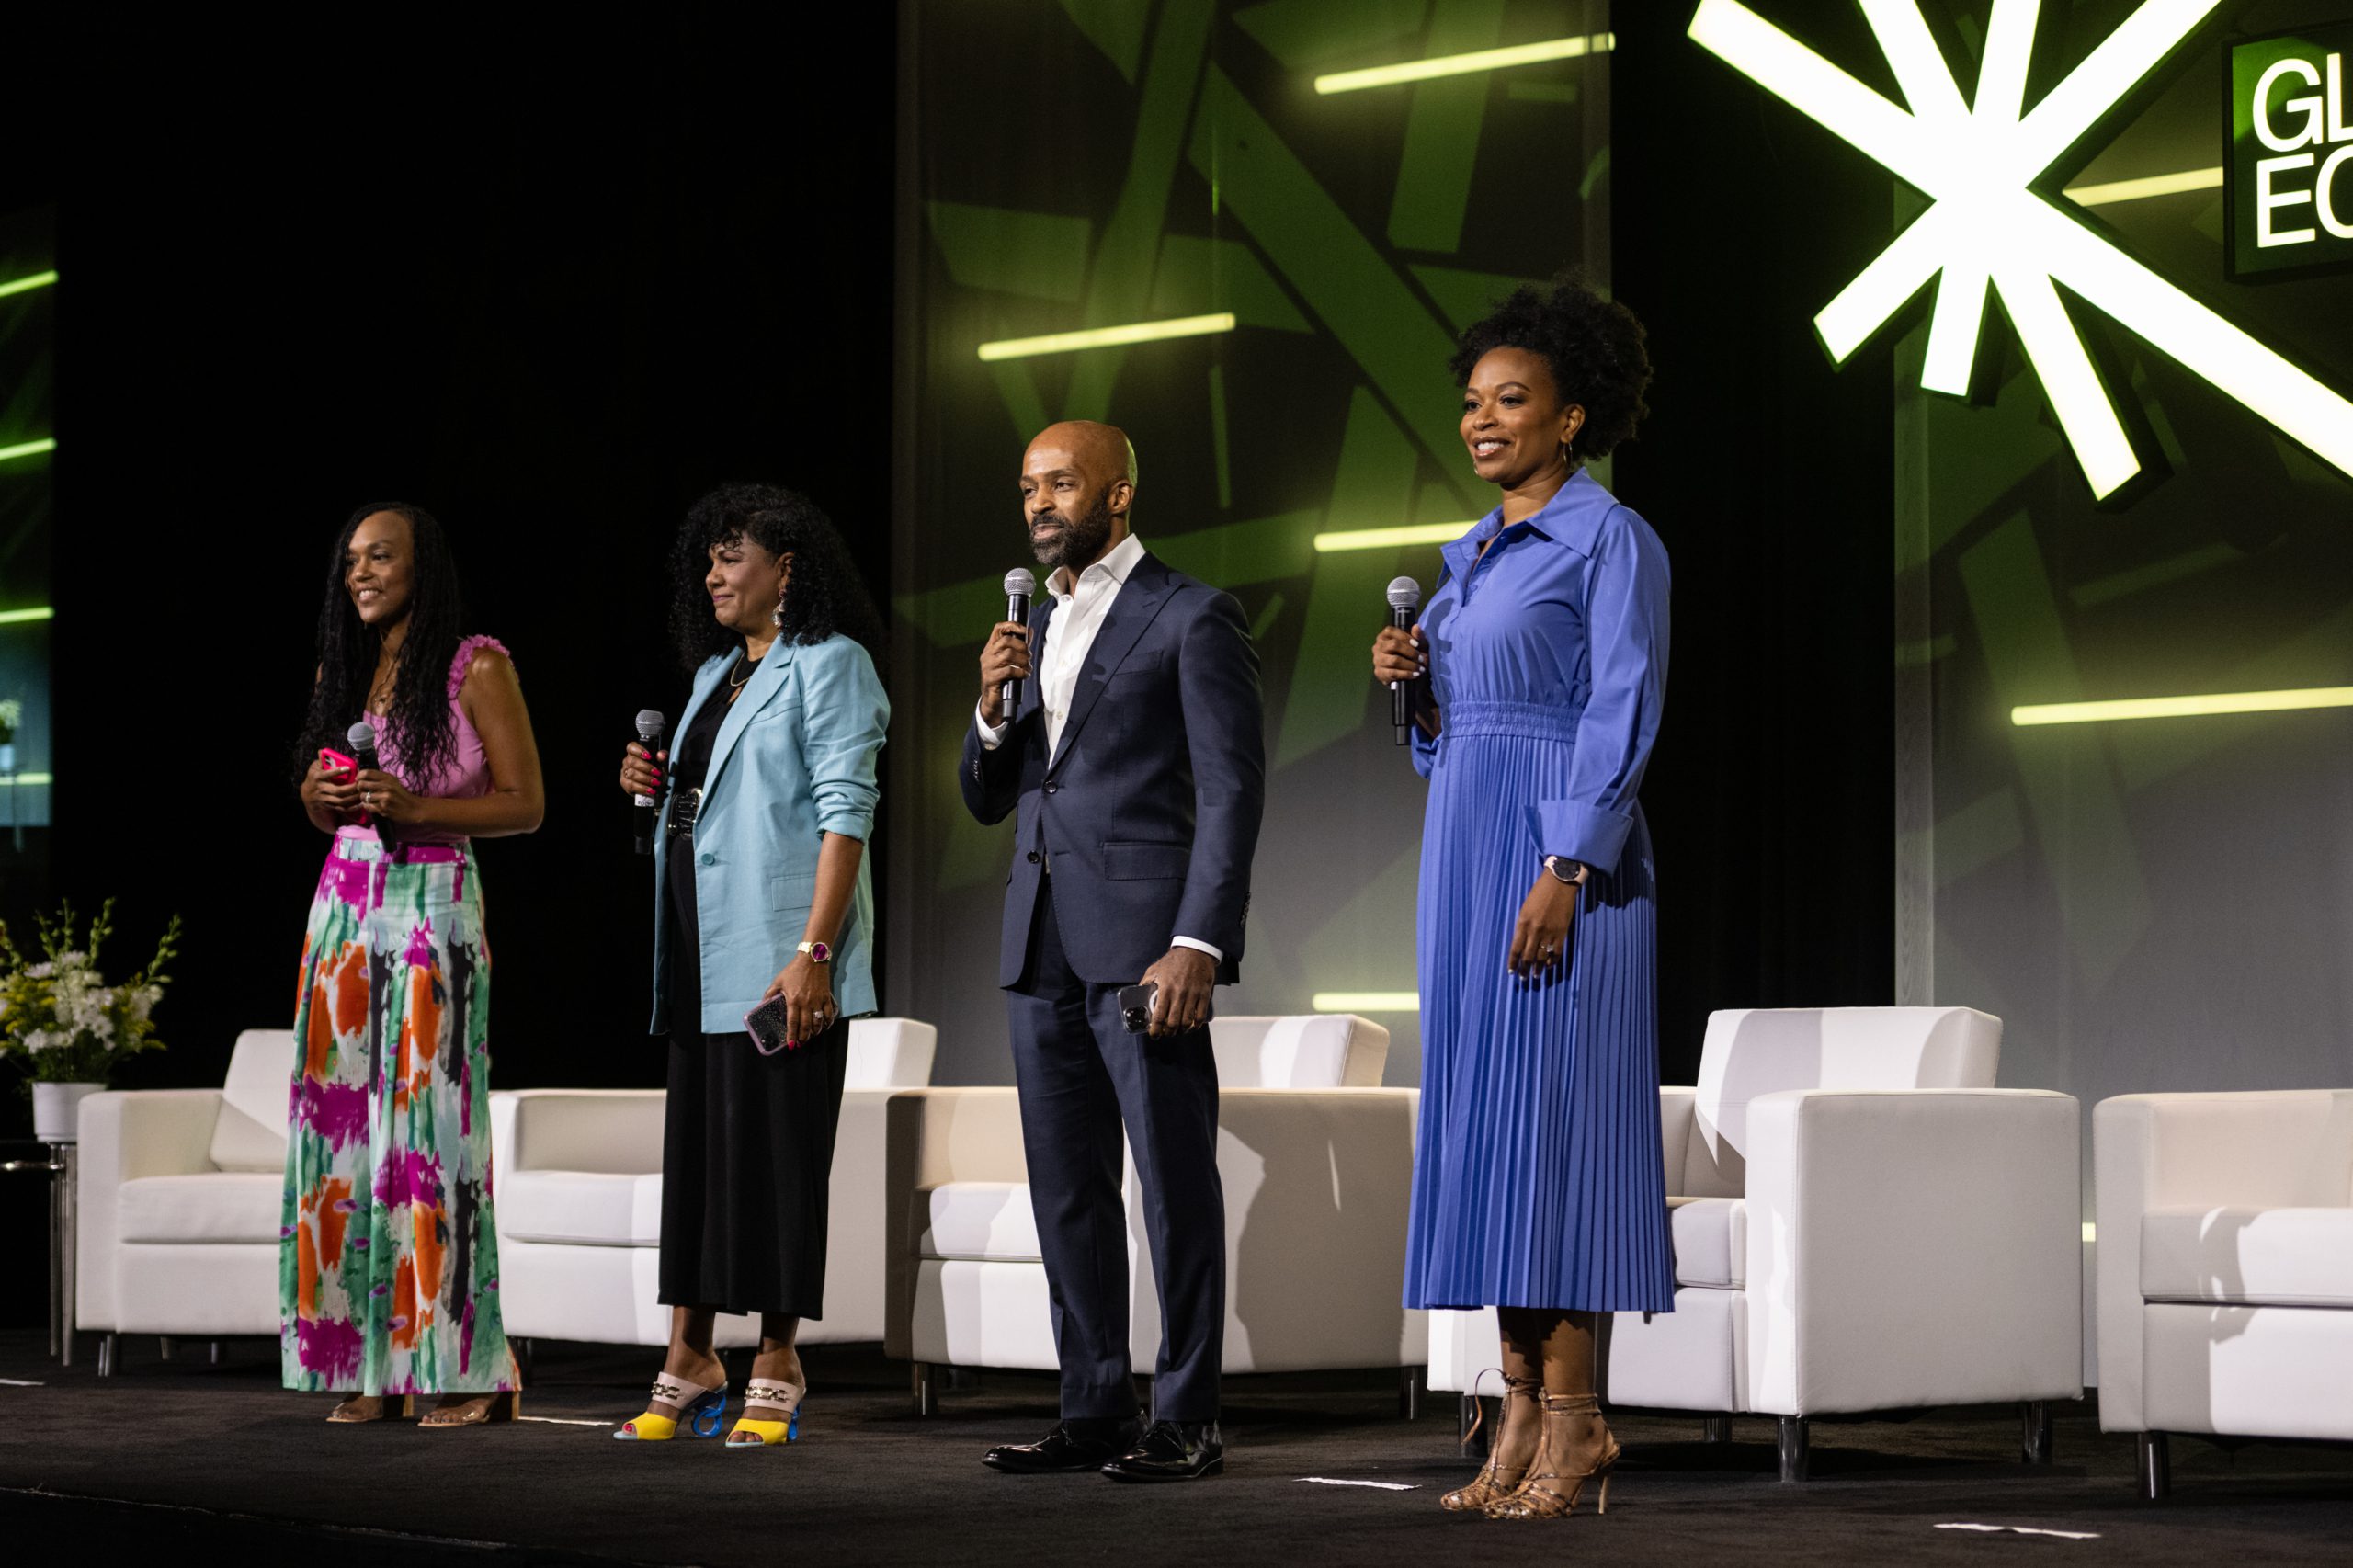 Photos of three Black women and one Black man on stage with white chairs in the background. 